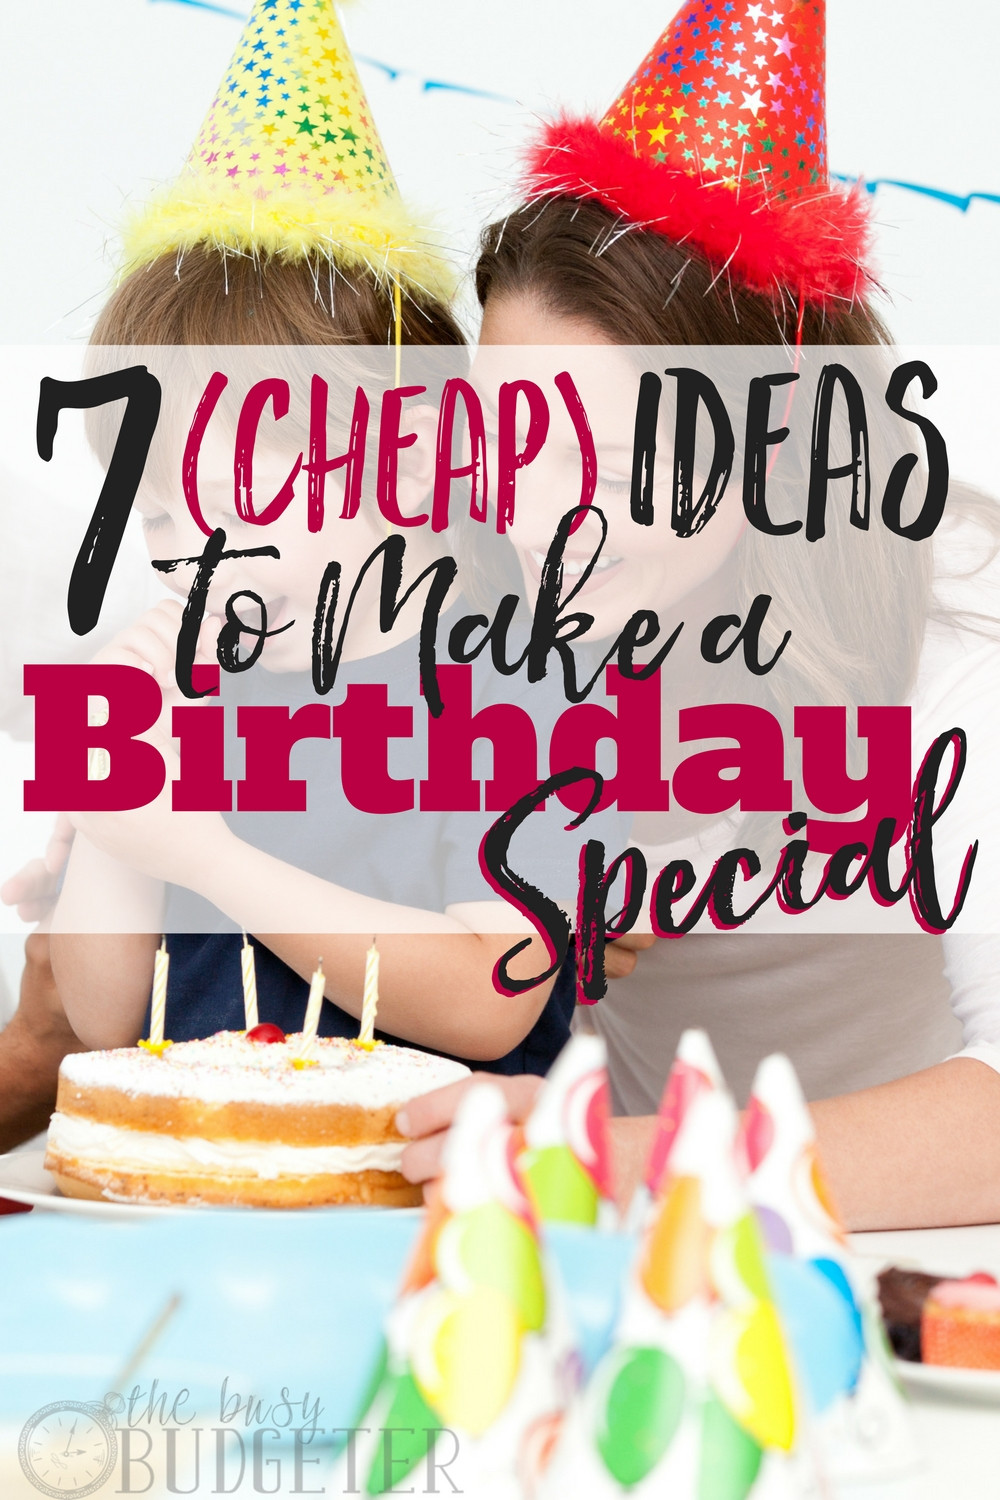 Cheap Birthday Gifts
 7 Cheap Ideas to Make a Birthday Special